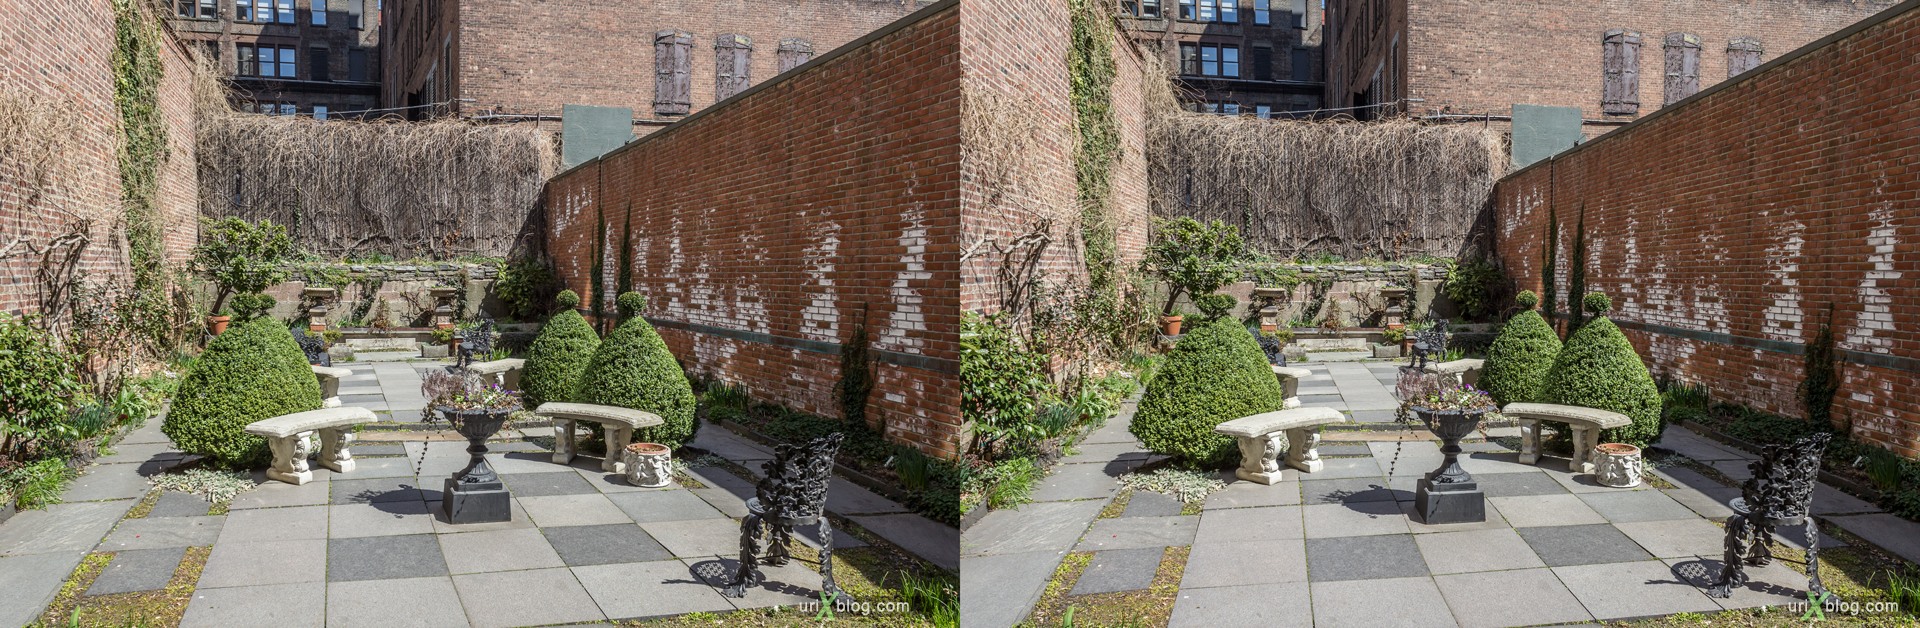 2013, Merchant's House Museum, NYC, New York City, USA, 3D, stereo pair, cross-eyed, crossview, cross view stereo pair, stereoscopic